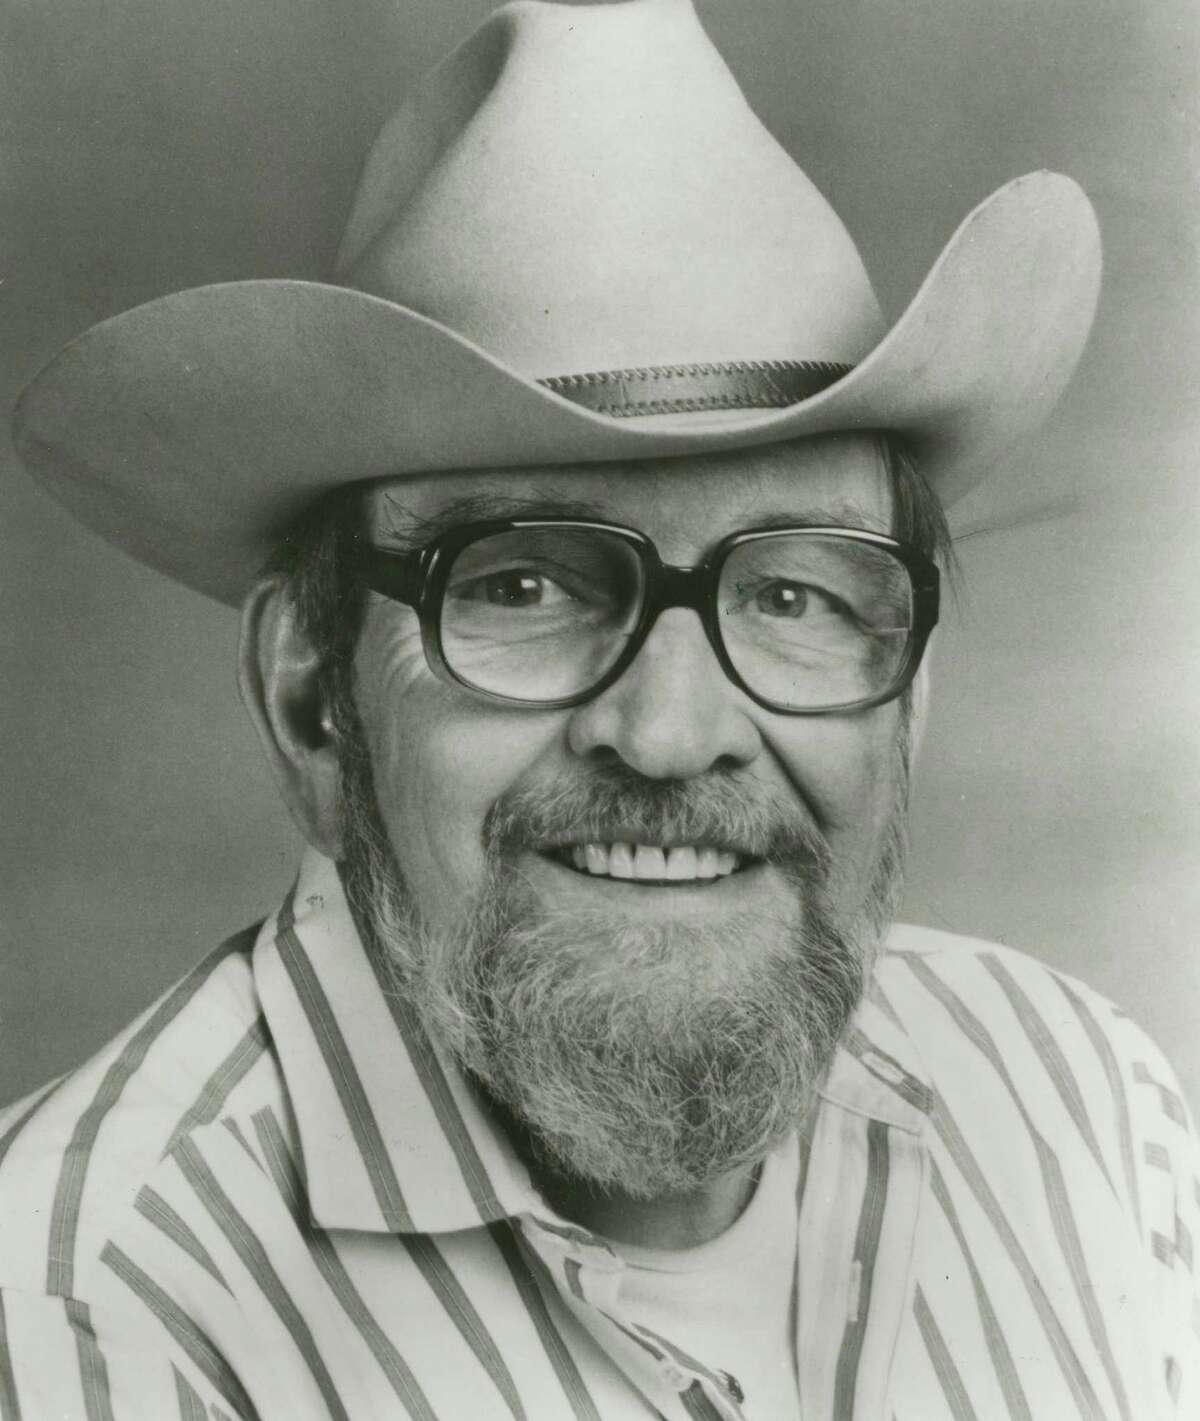 Larry L. King - author and playwright of "The Best Little Whorehouse in Texas," and "The Night Hank Williams Died"